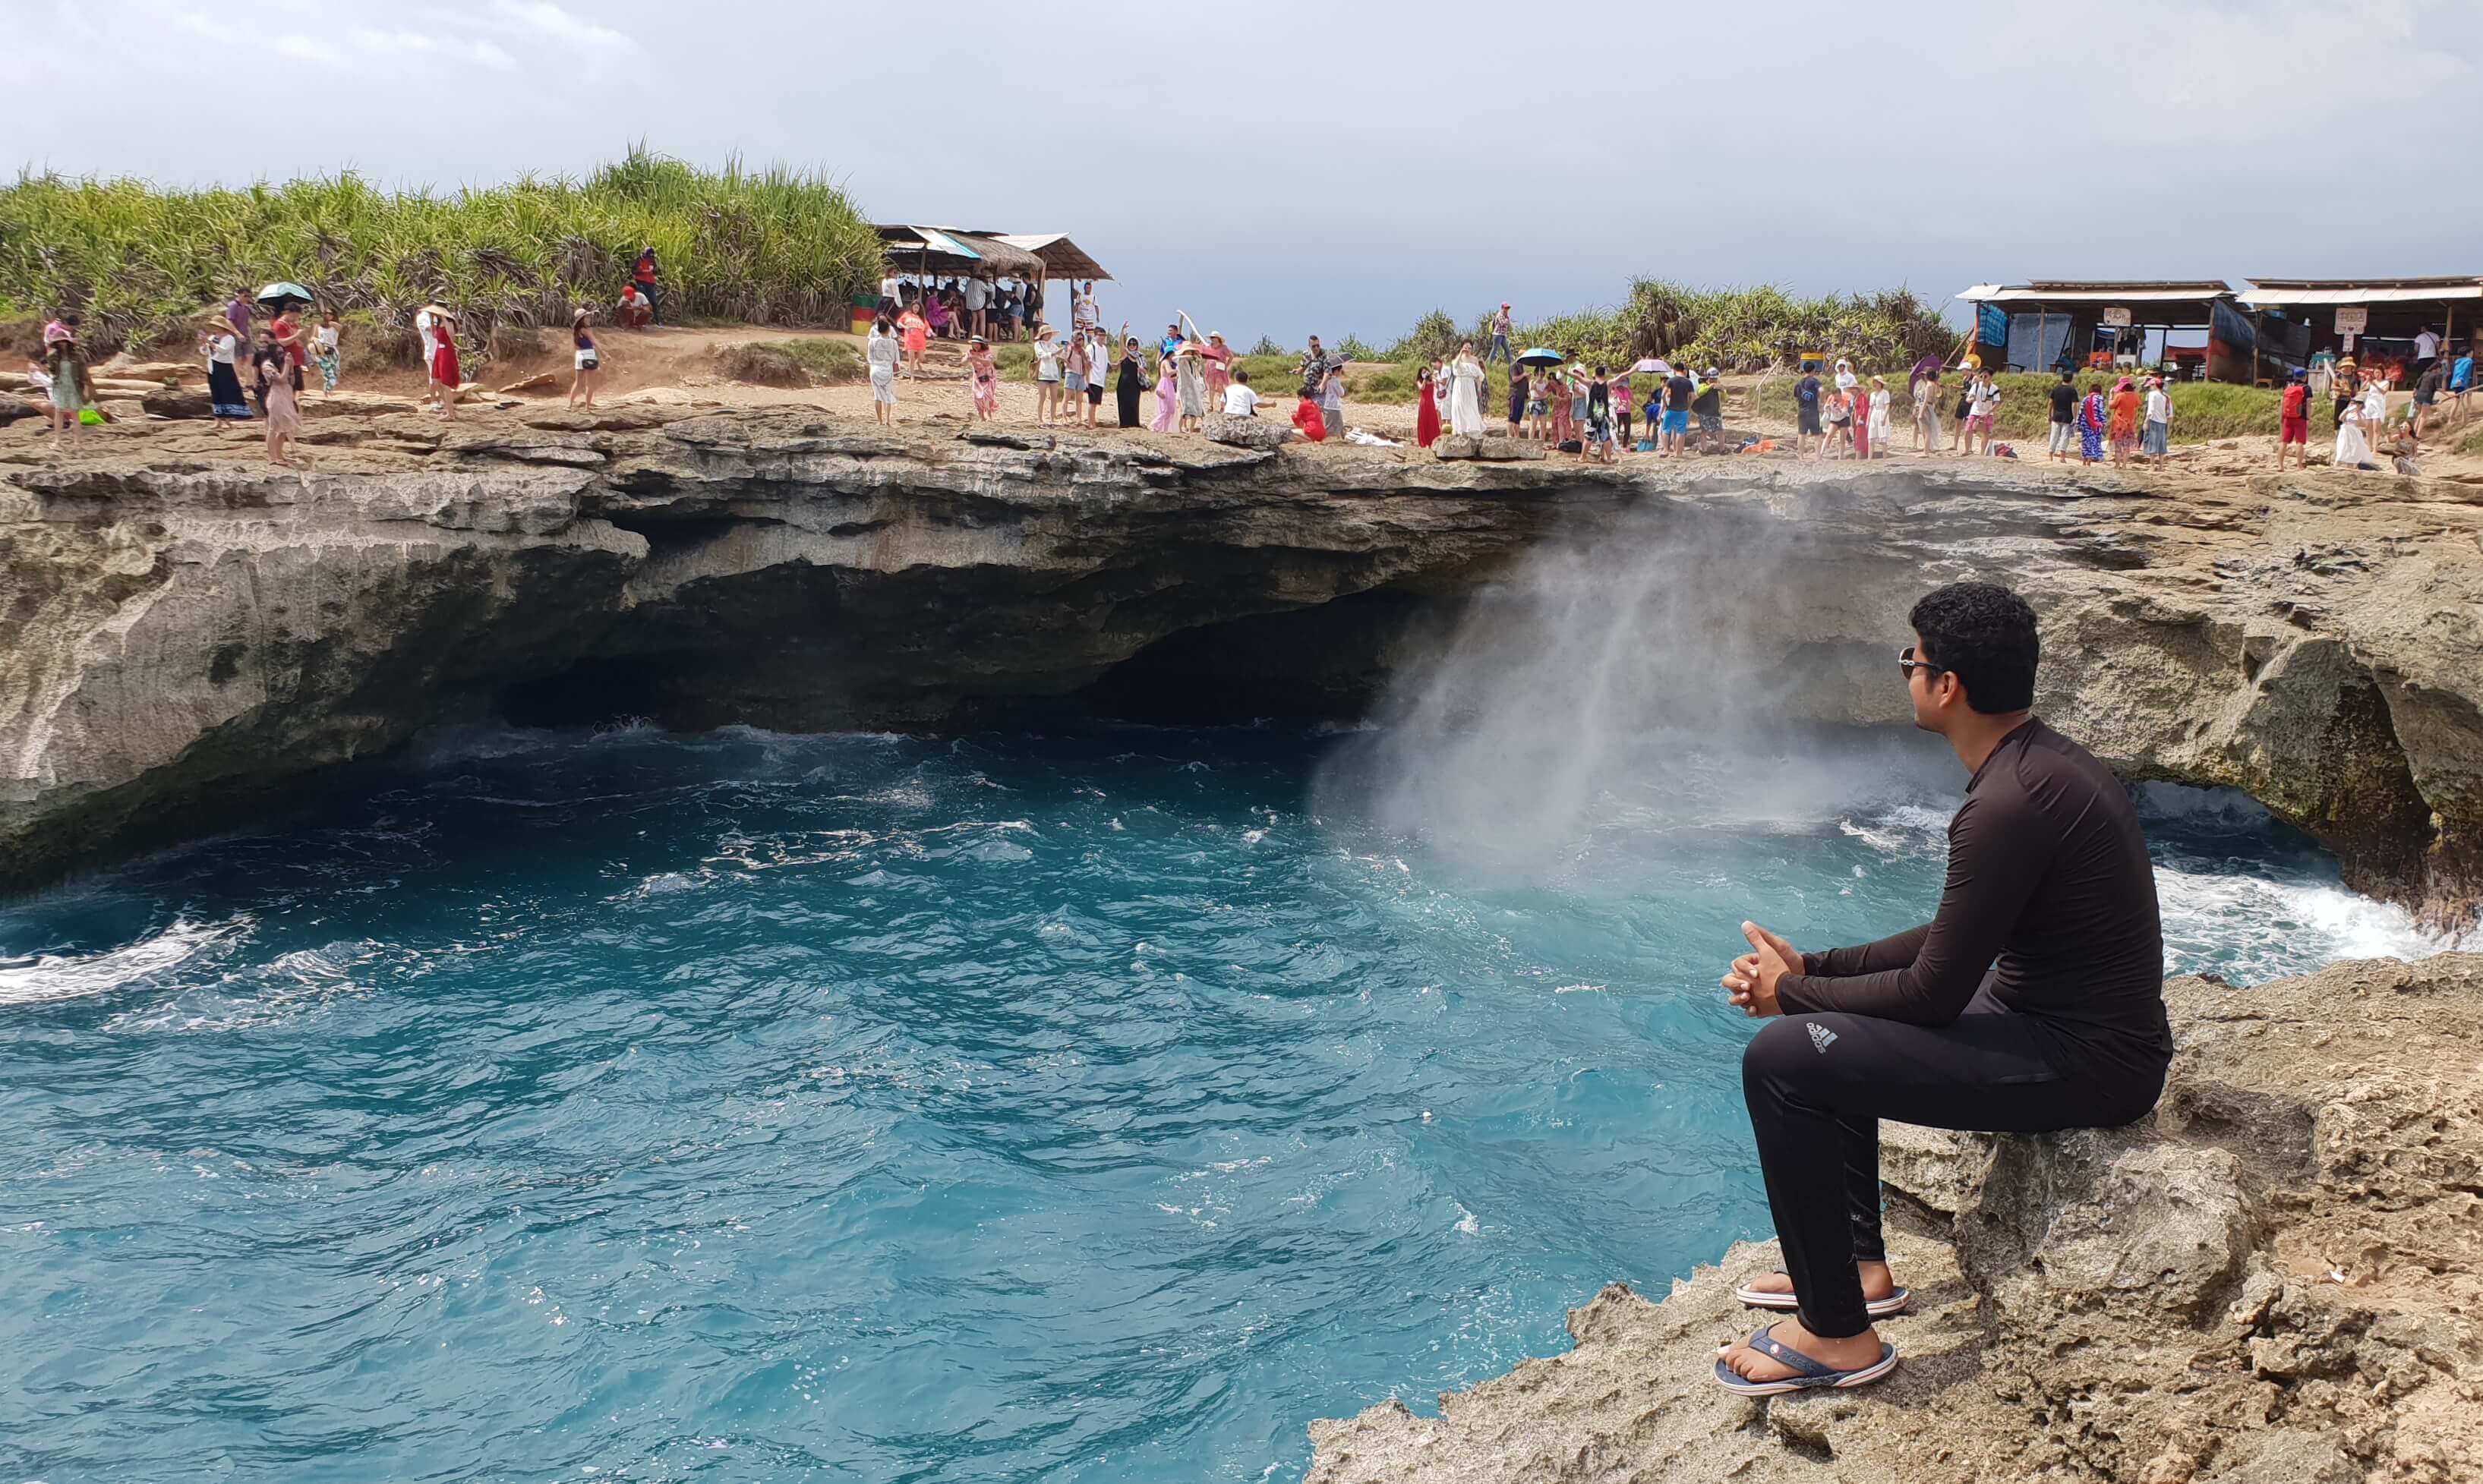 One of the most enjoyable things to do in Nusa Lembongan is watching the water spraying from beneath the rocks at the Devil's Tear